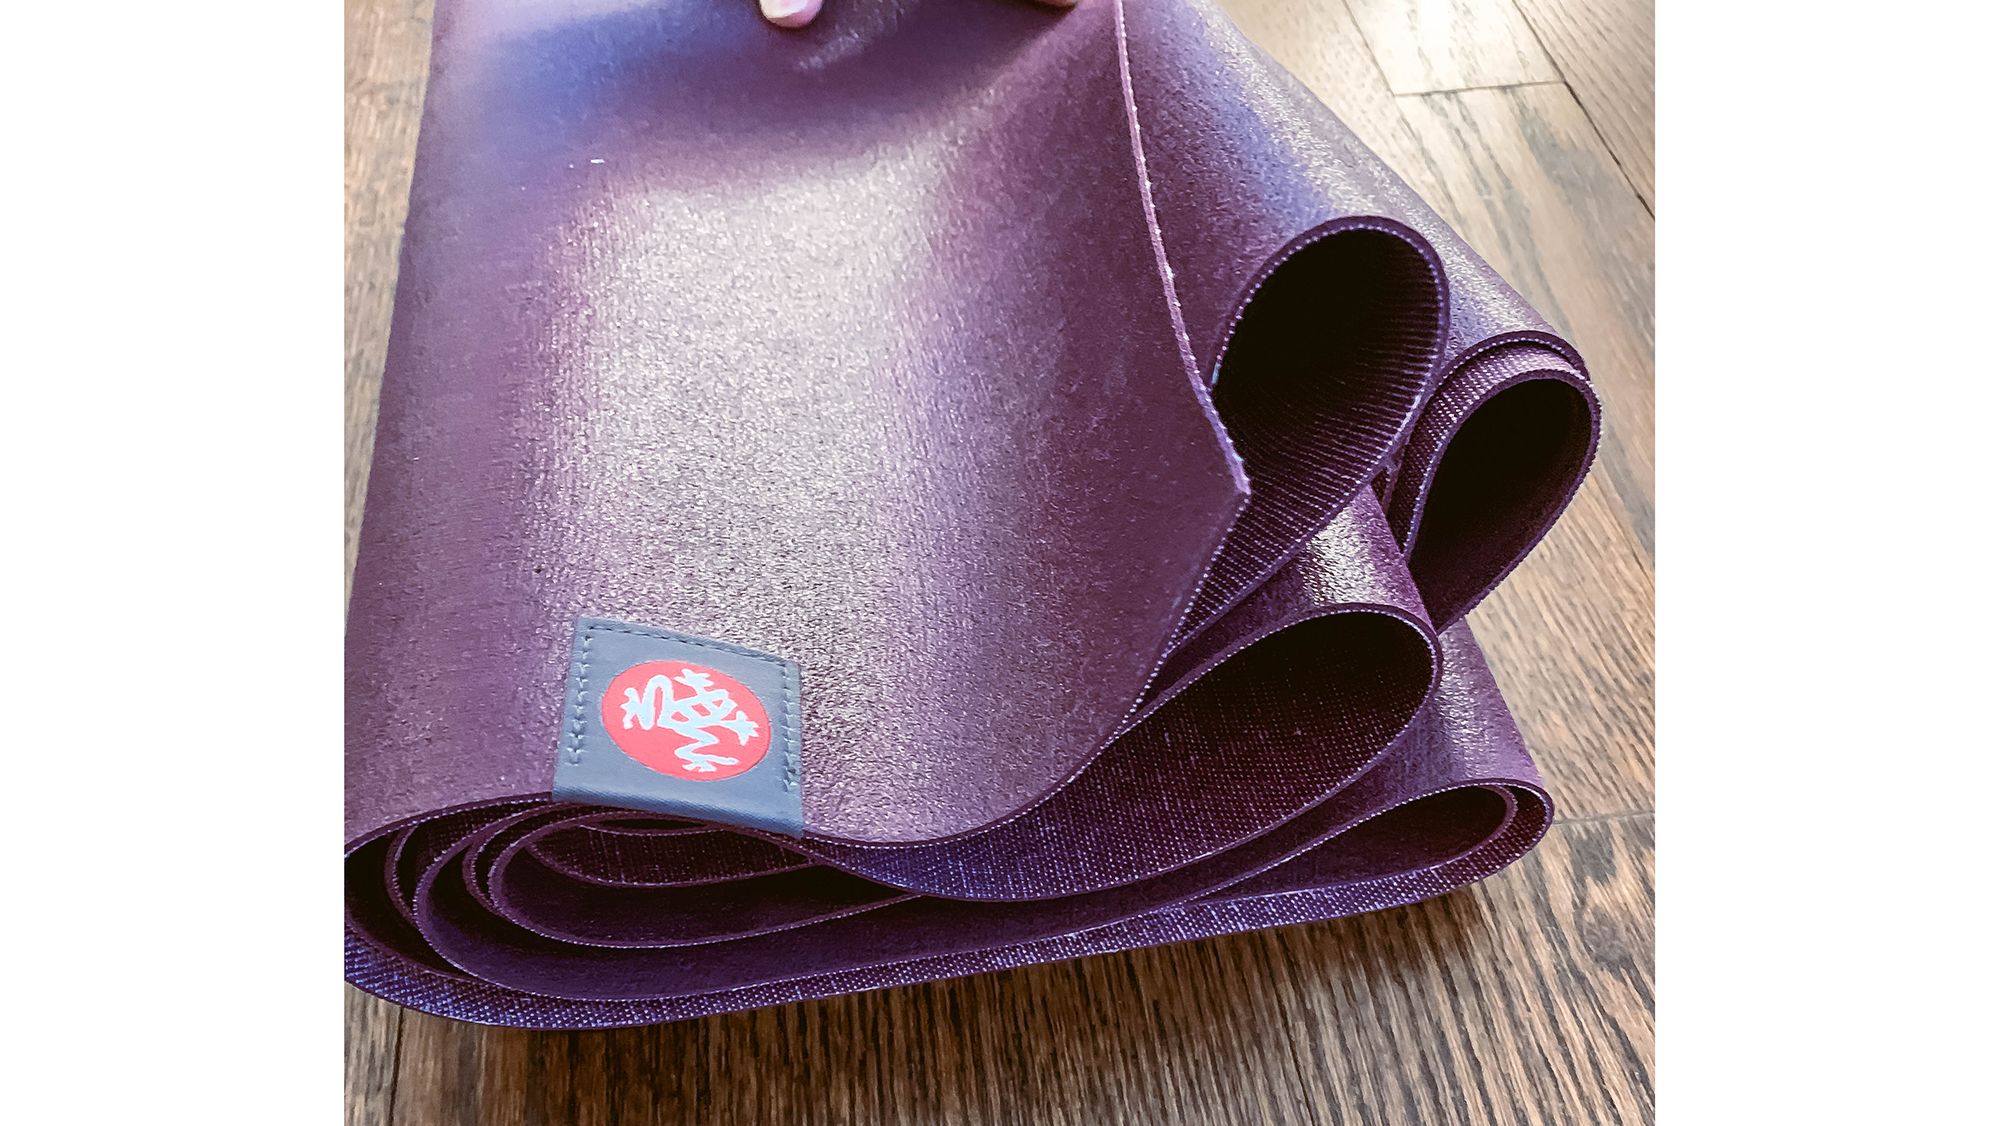 Best Yoga Mats - We've Tested Sweaty Betty, Lululemon and More